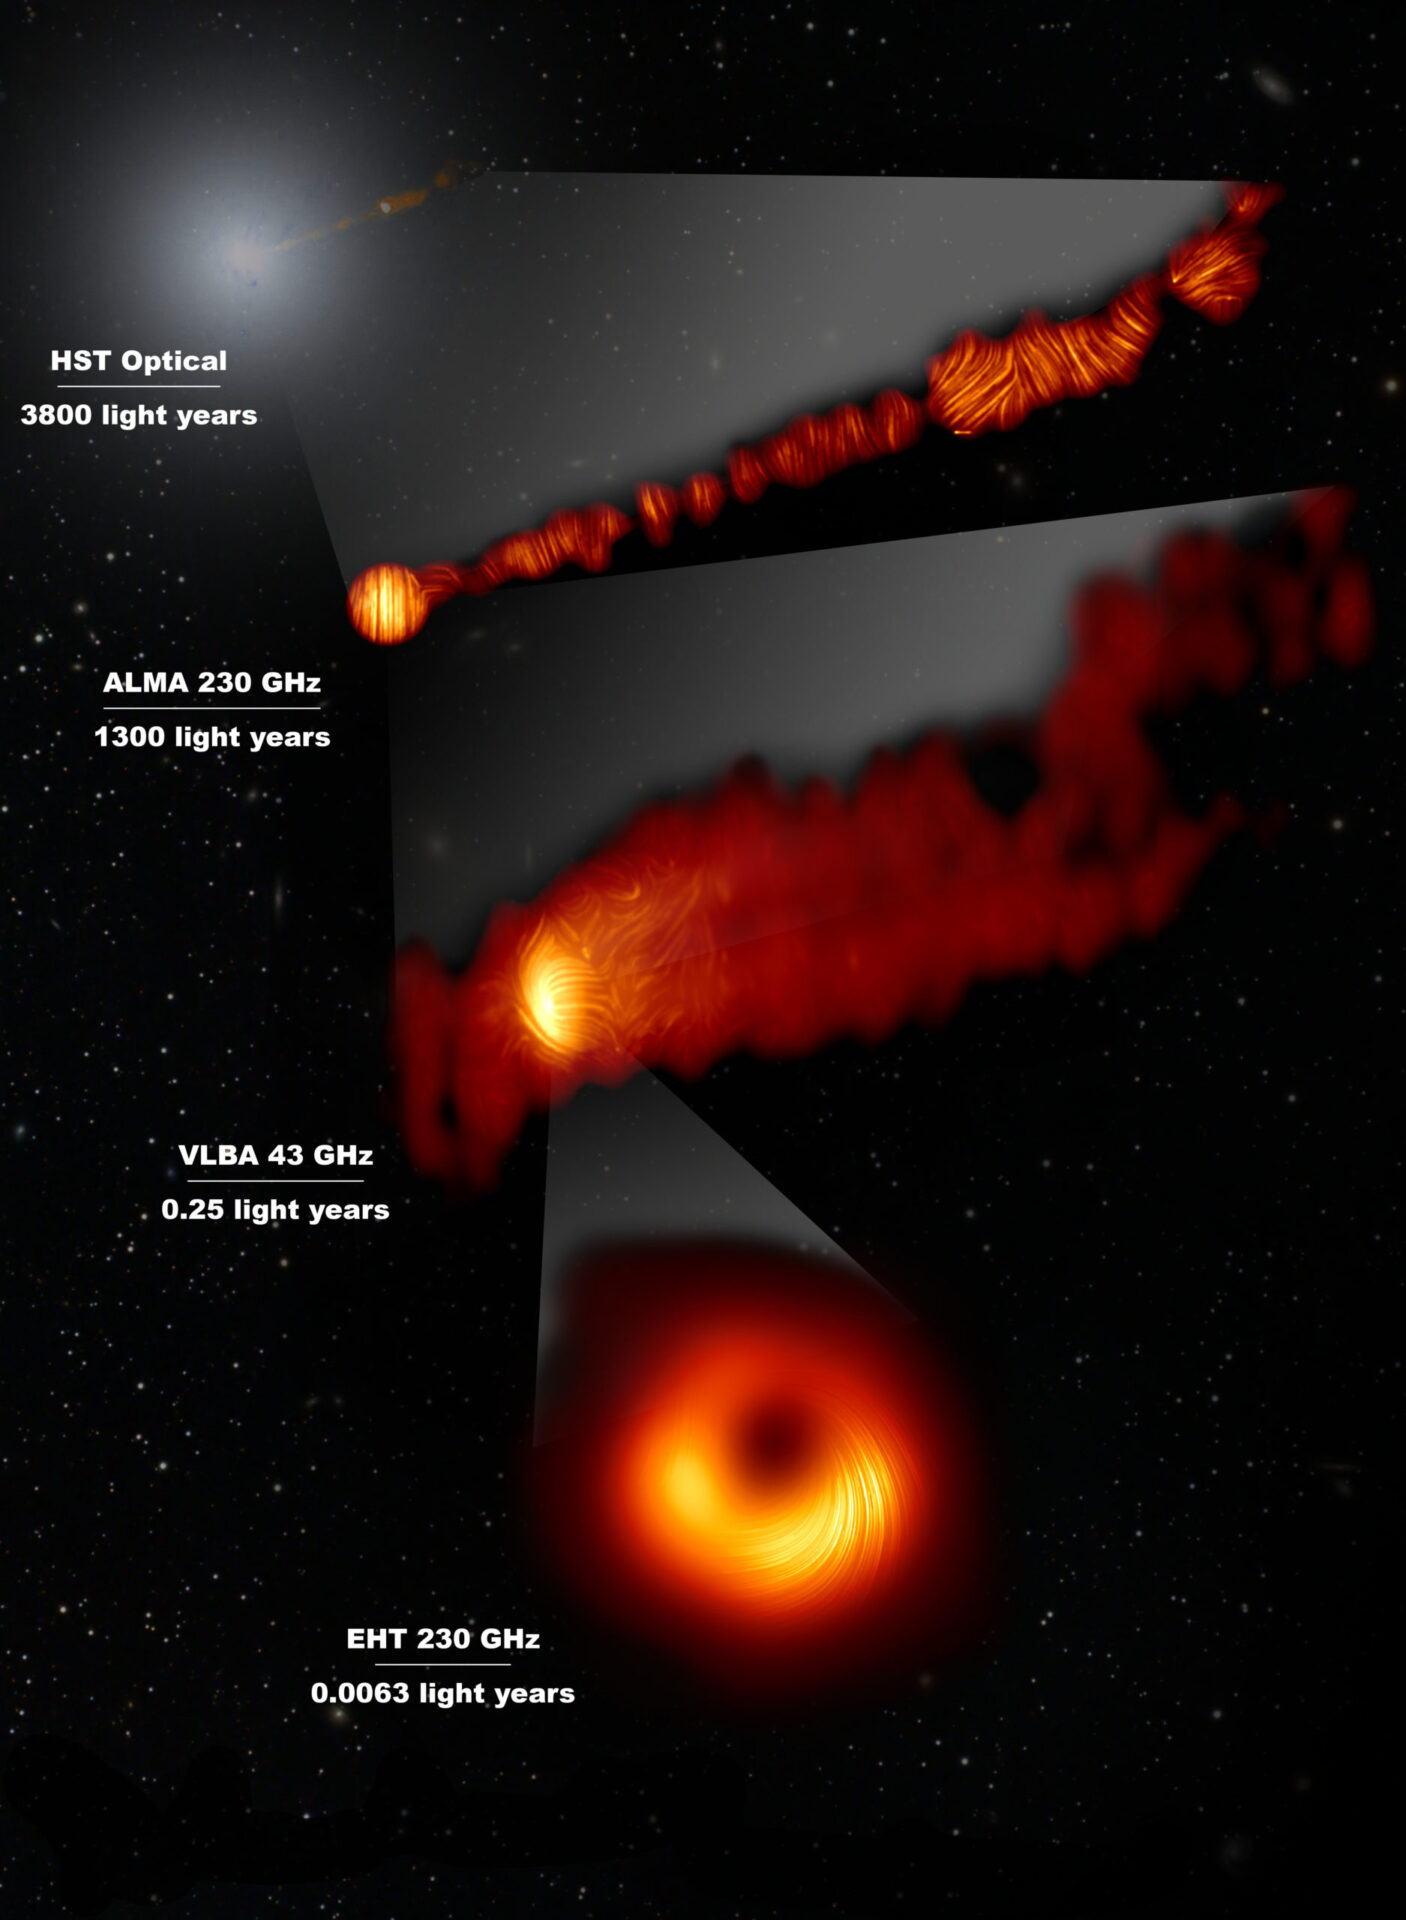 <p>This composite image shows three views of the central region of the Messier 87 (M87) galaxy in polarised light and one view, in the visible wavelength, taken with the Hubble Space Telescope. The galaxy has a supermassive black hole at its centre and is famous for its jets, that extend far beyond the galaxy. The Hubble image at the top captures a part of the jet some 6000 light years in size.</p>
<p>One of the polarised-light images, obtained with the Chile-based Atacama Large Millimeter/submillimeter Array (ALMA), in which ESO is a partner, shows part of the jet in polarised light. This image captures the part of the jet, with a size of 6000 light years, closer to the centre of the galaxy.</p>
<p>The other polarised light images zoom in closer to the supermassive black hole: the middle view covers a region about one light year in size and was obtained with the National Radio Astronomy Observatory’s Very Long Baseline Array (VLBA) in the US. </p>
<p>The most zoomed-in view was obtained by linking eight telescopes around the world to create a virtual Earth-sized telescope, the Event Horizon Telescope or EHT. This allows astronomers to see very close to the supermassive black hole, into the region where the jets are launched. </p>
<p>The lines mark the orientation of polarisation, which is related to the magnetic field in the regions imaged. The ALMA data provides a description of the magnetic field structure along the jet. Therefore the combined information from the EHT and ALMA allows astronomers to investigate the role of magnetic fields from the vicinity of the event horizon (as probed with the EHT on light-day scales) to far beyond the M87 galaxy along its powerful jets (as probed with ALMA on scales of thousand of light-years).</p>
<p>The values in GHz refer to the frequencies of light at which the different observations were made. The horizontal lines show the scale (in light years) of each of the individual images. Credit: EHT Collaboration; ALMA (ESO/NAOJ/NRAO), Goddi et al.; NASA, ESA and the Hubble Heritage Team (STScI/AURA); VLBA (NRAO), Kravchenko et al.; J. C. Algaba, I. Martí-Vidal</p>
